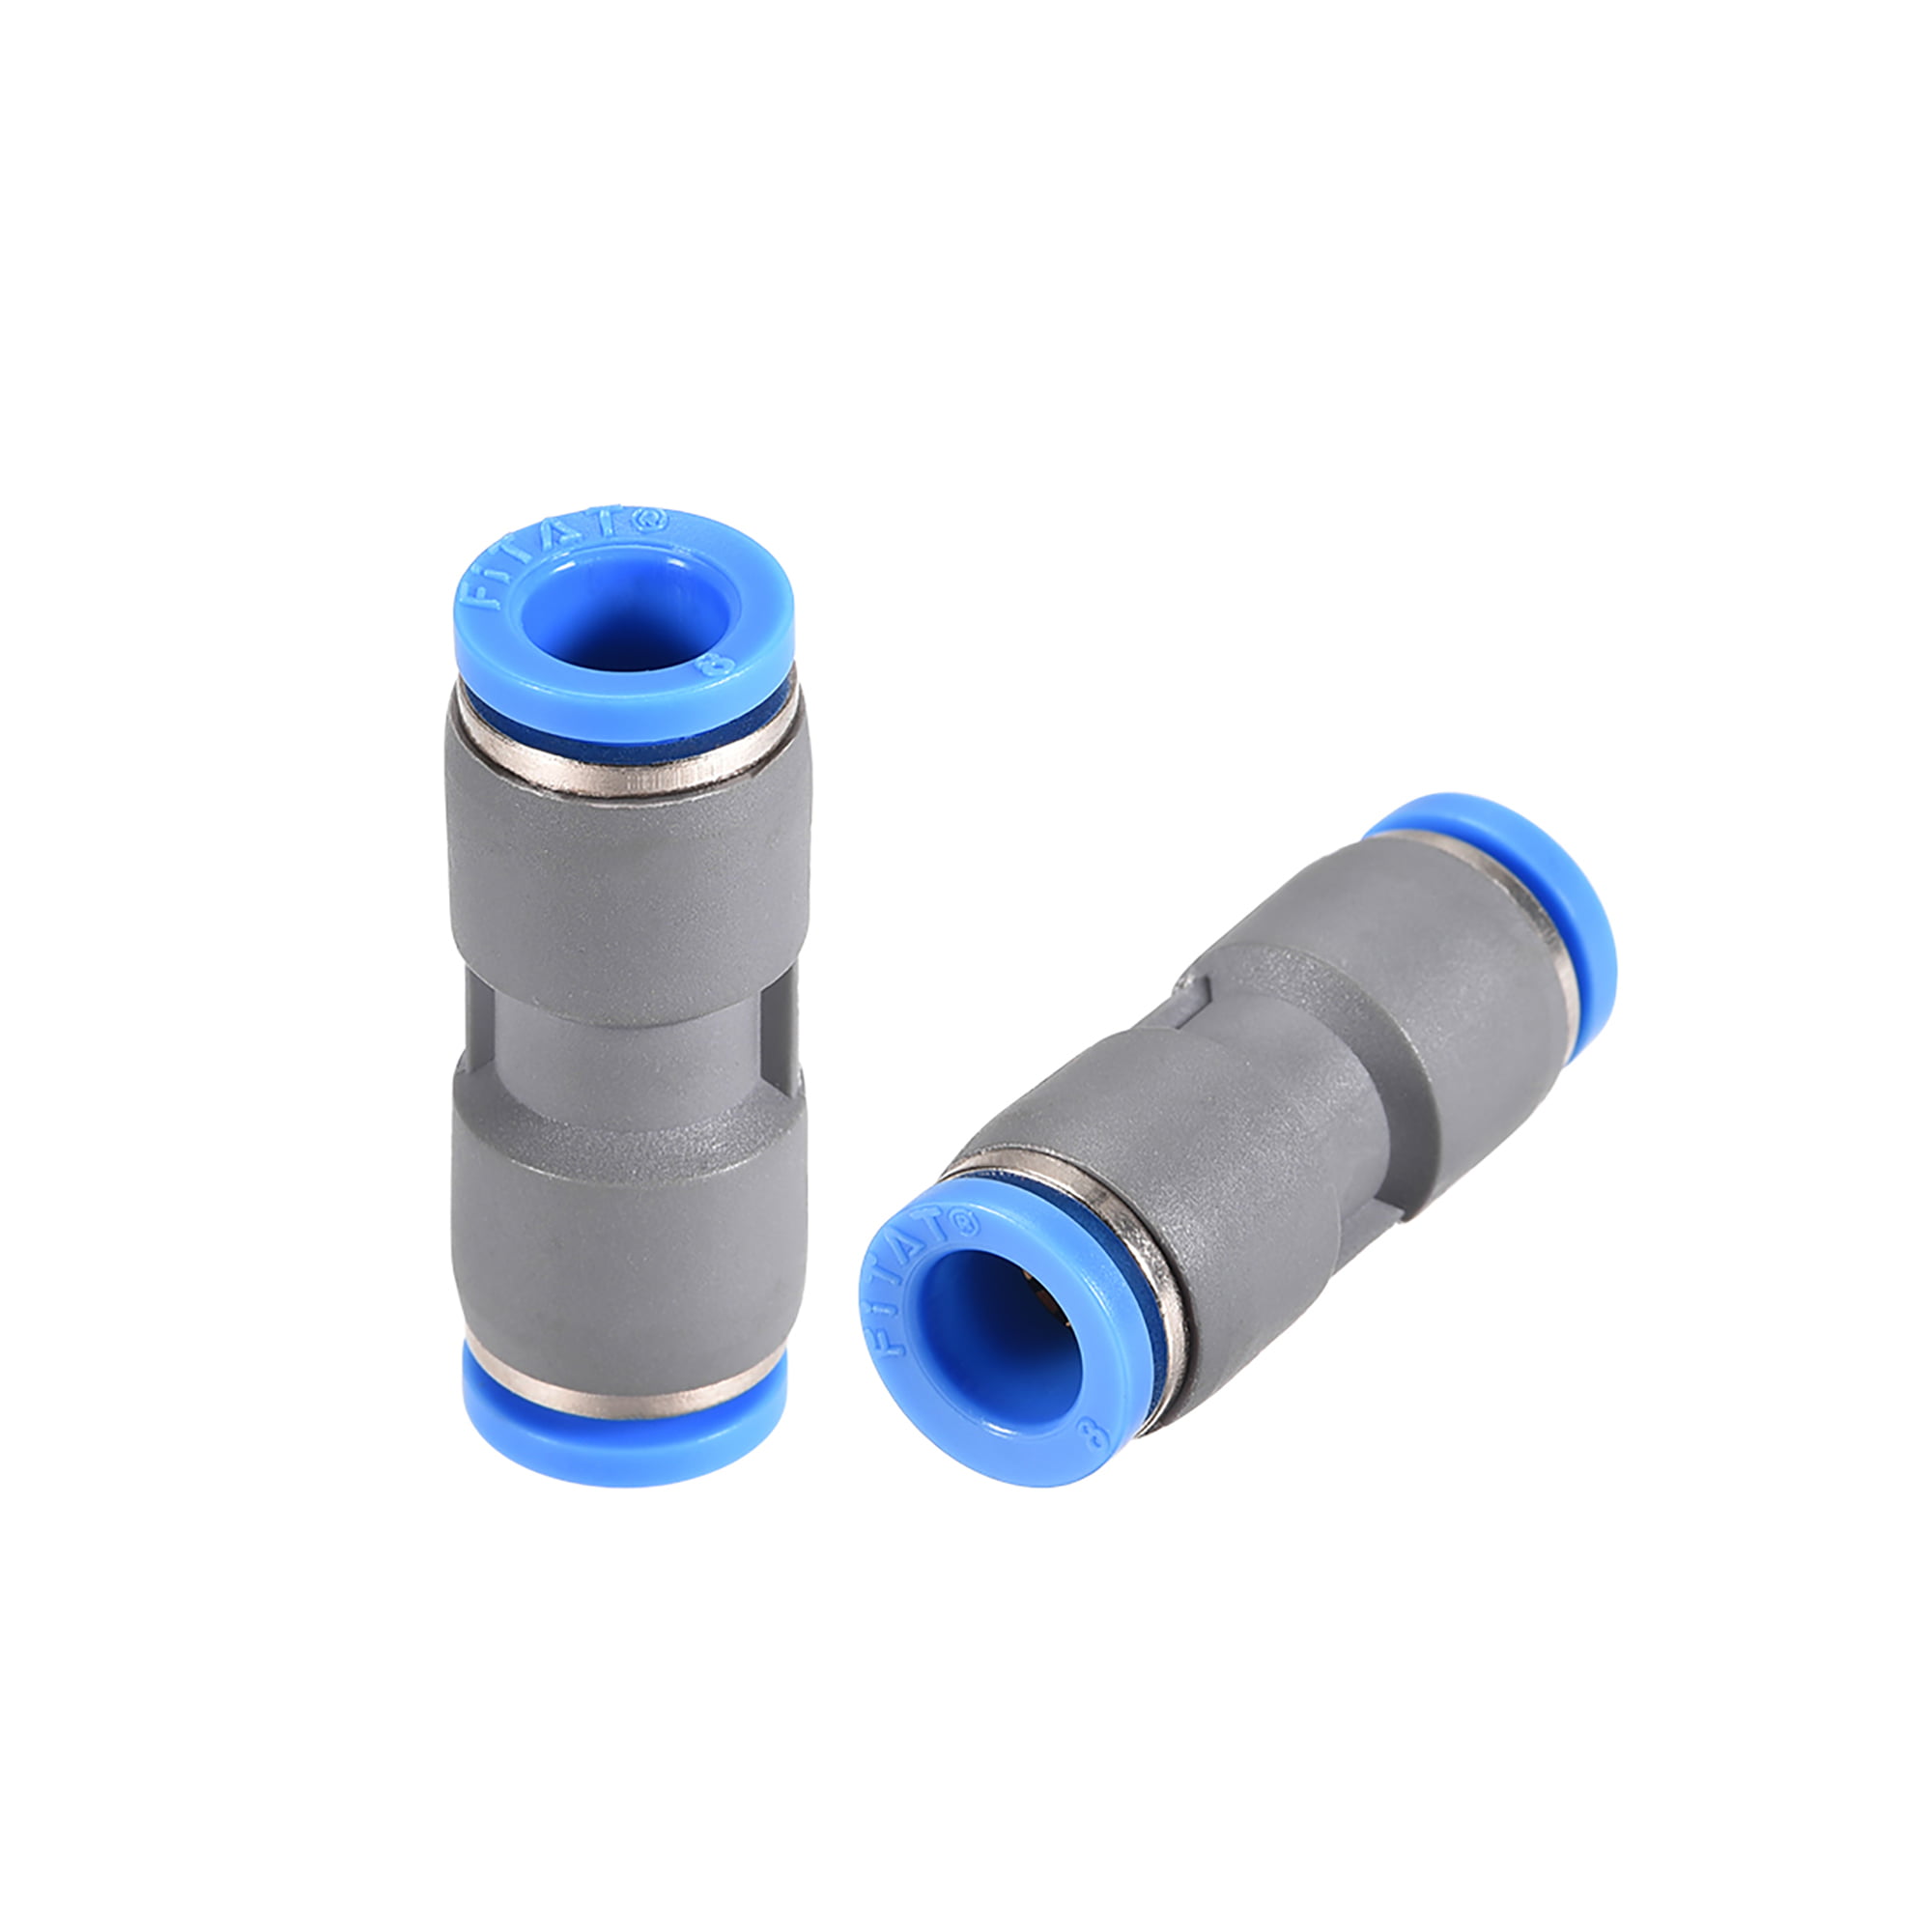 Straight Push Connectors 8mm Quick Release Pneumatic Connector Plastic Quick Release Button Connectors Telescoping Tubing